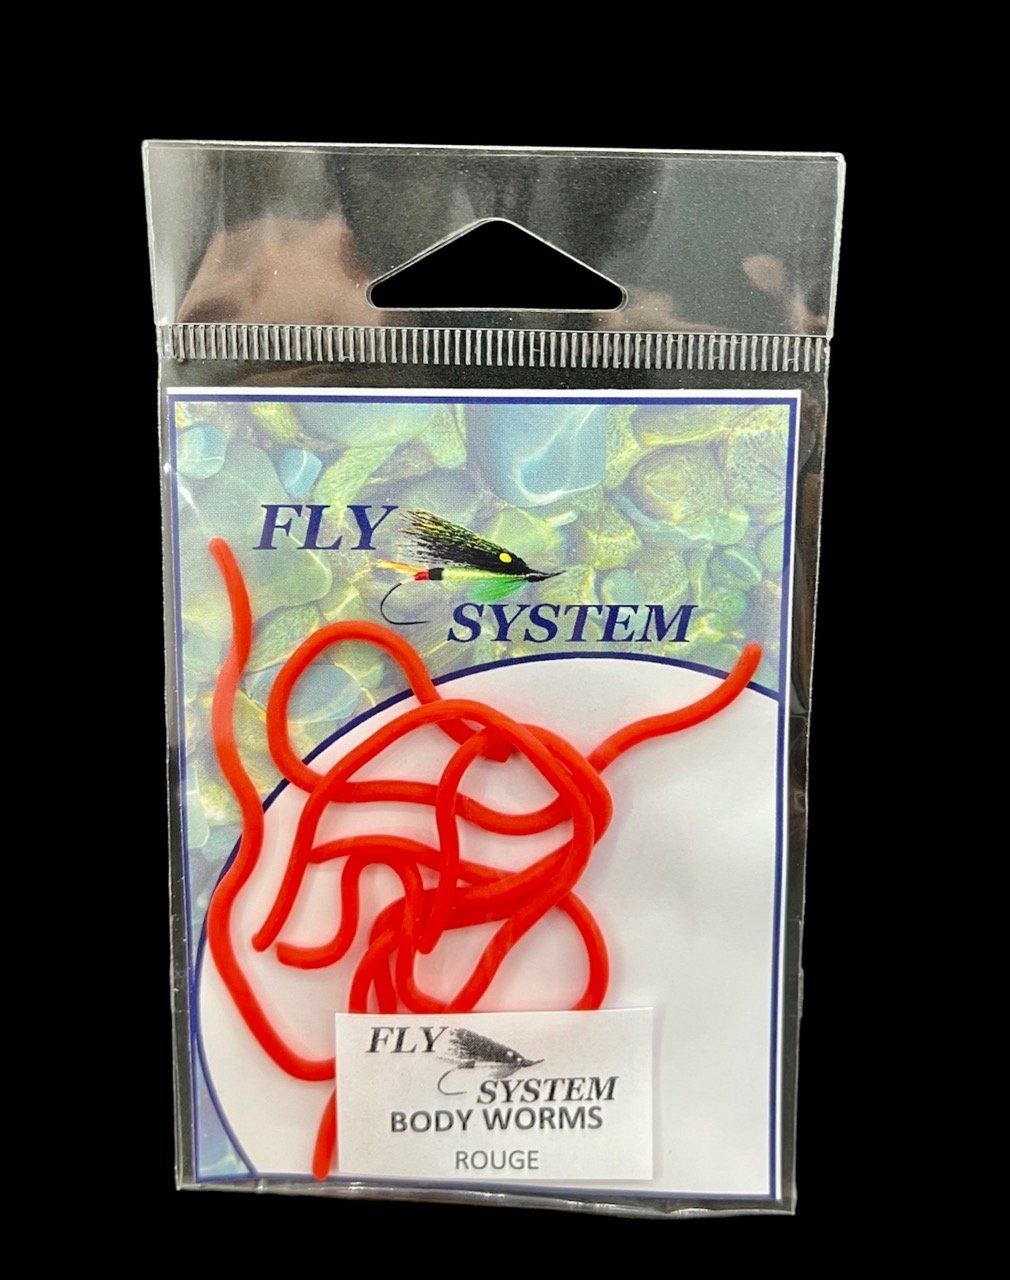 Body worms FLY SYSTEM